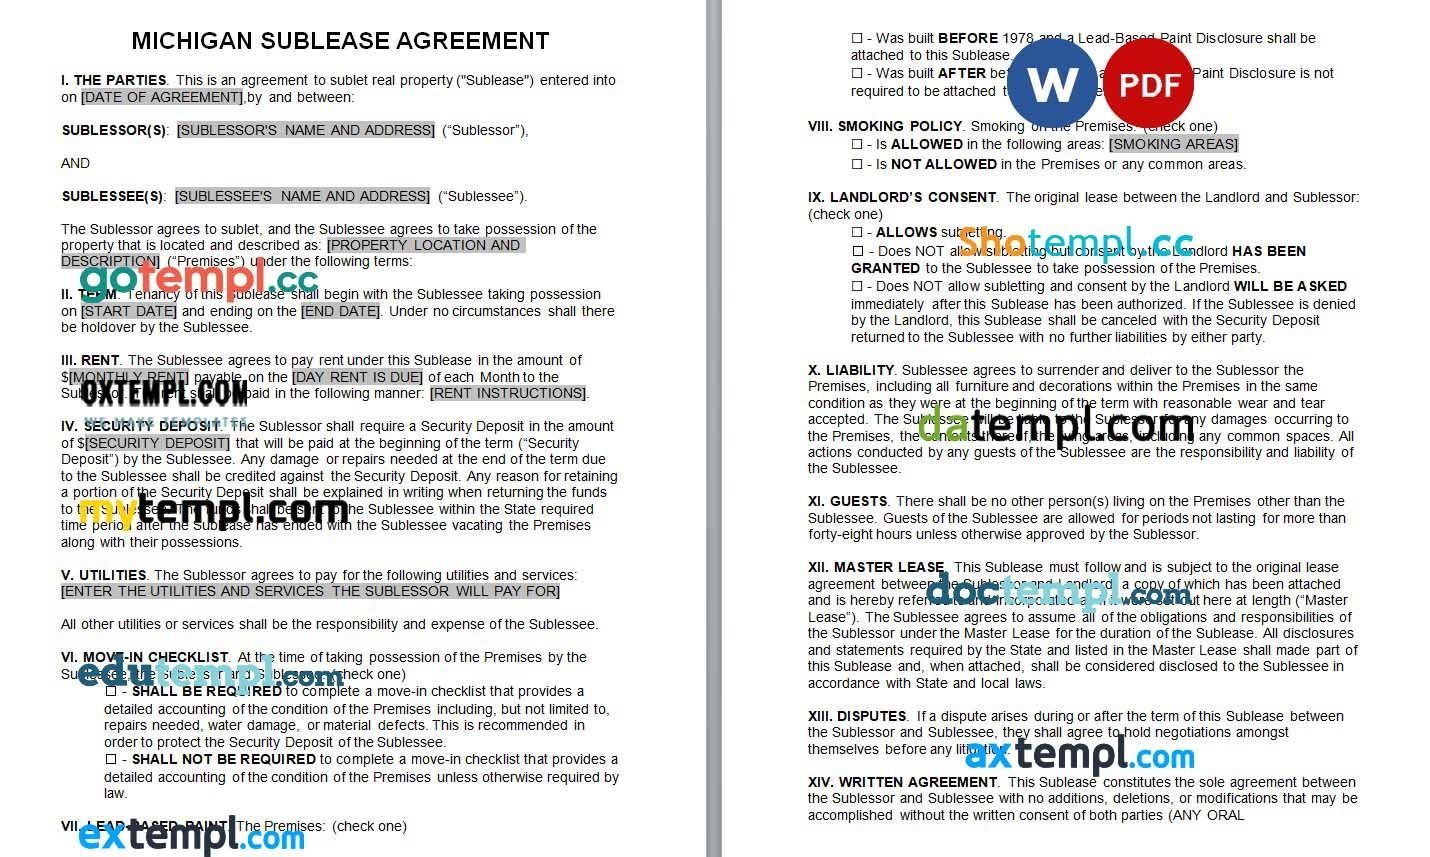 Michigan Sublease Agreement Word example, fully editable